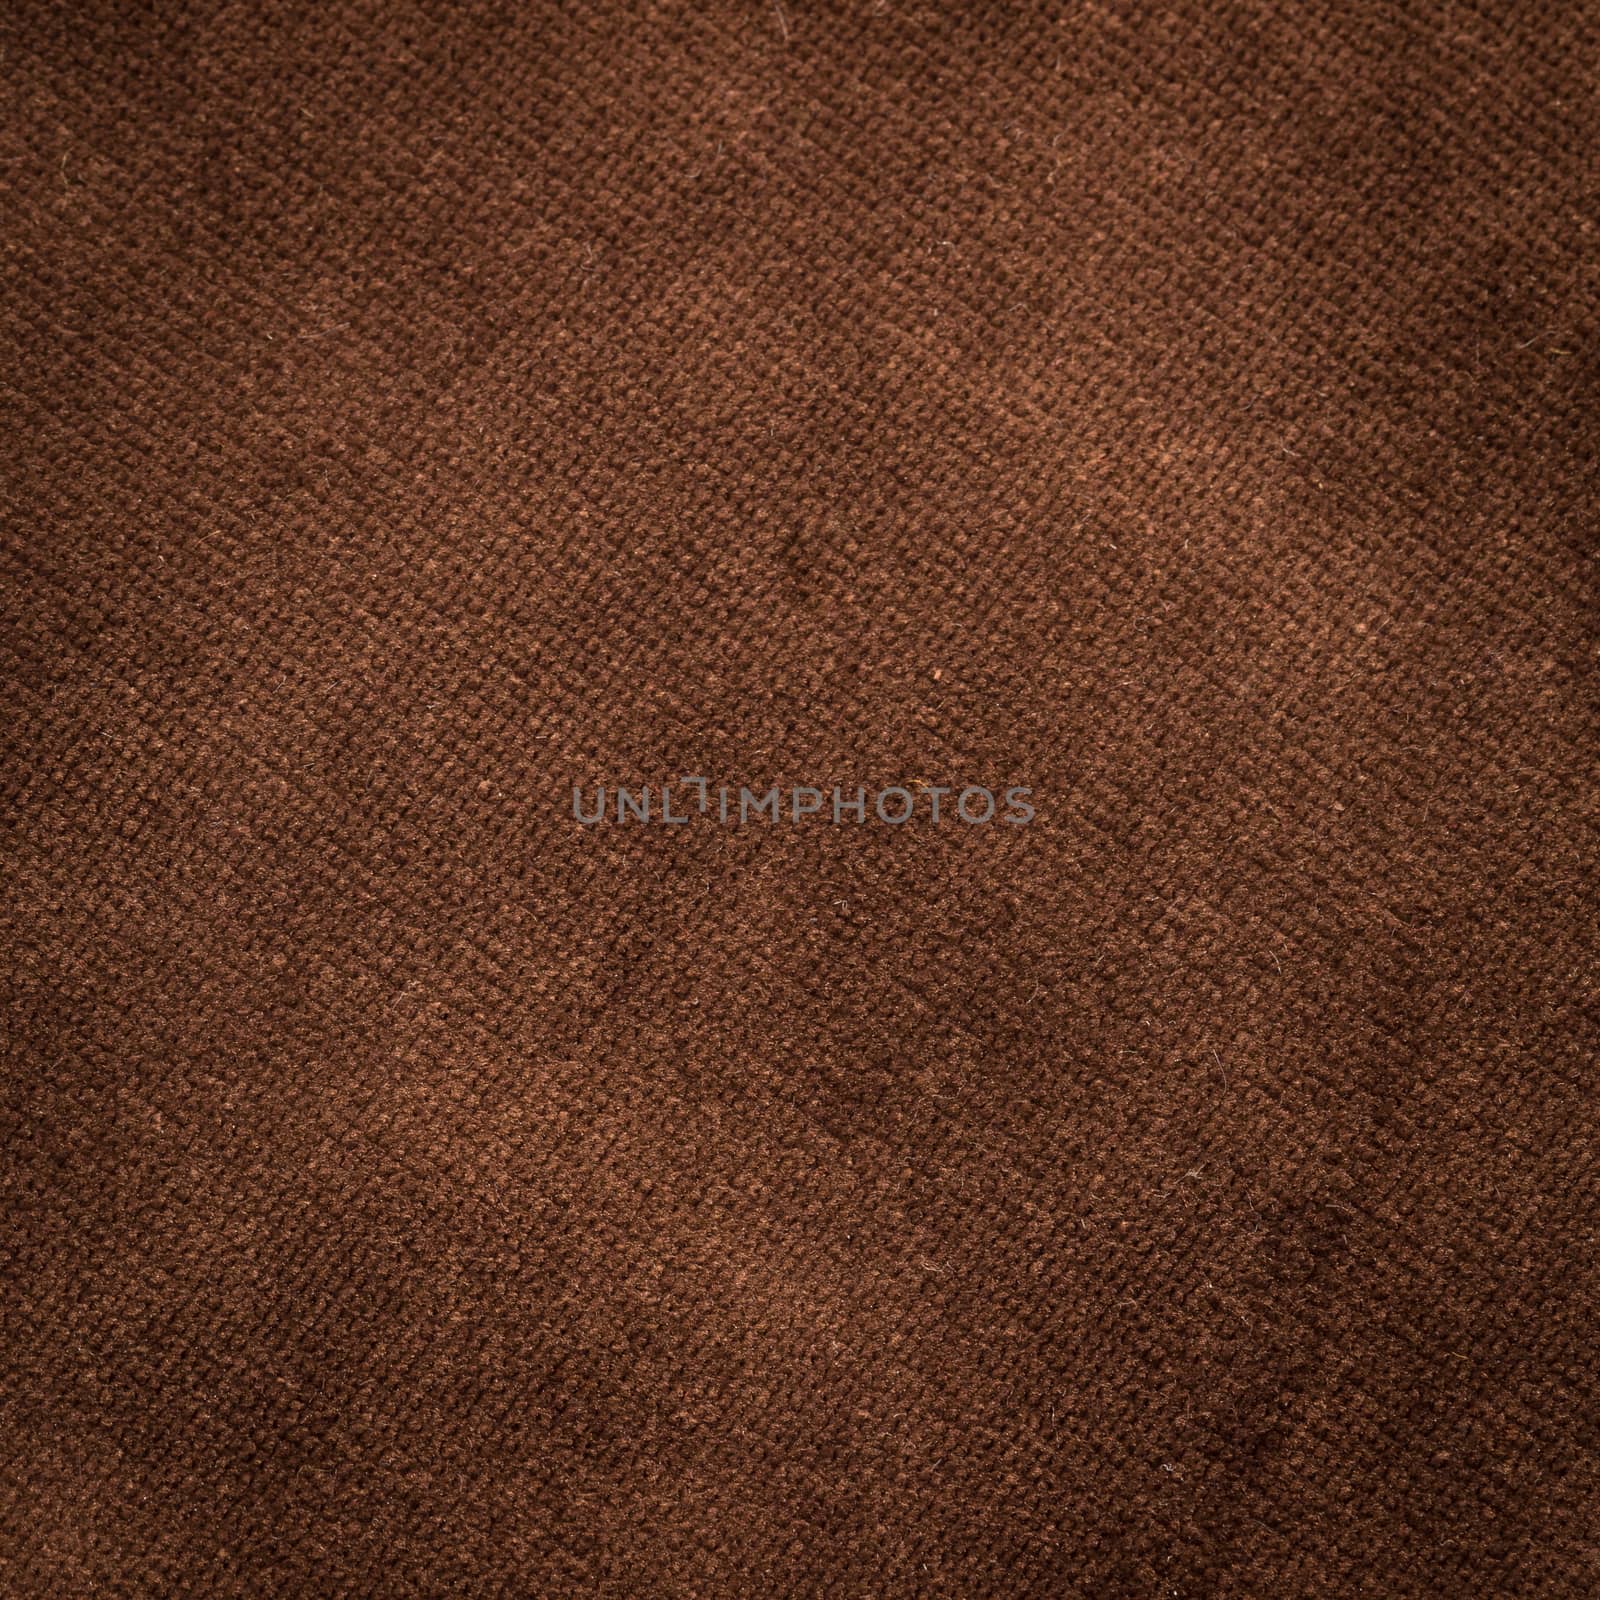 The Velvet fabric texture in brown color. Square shape